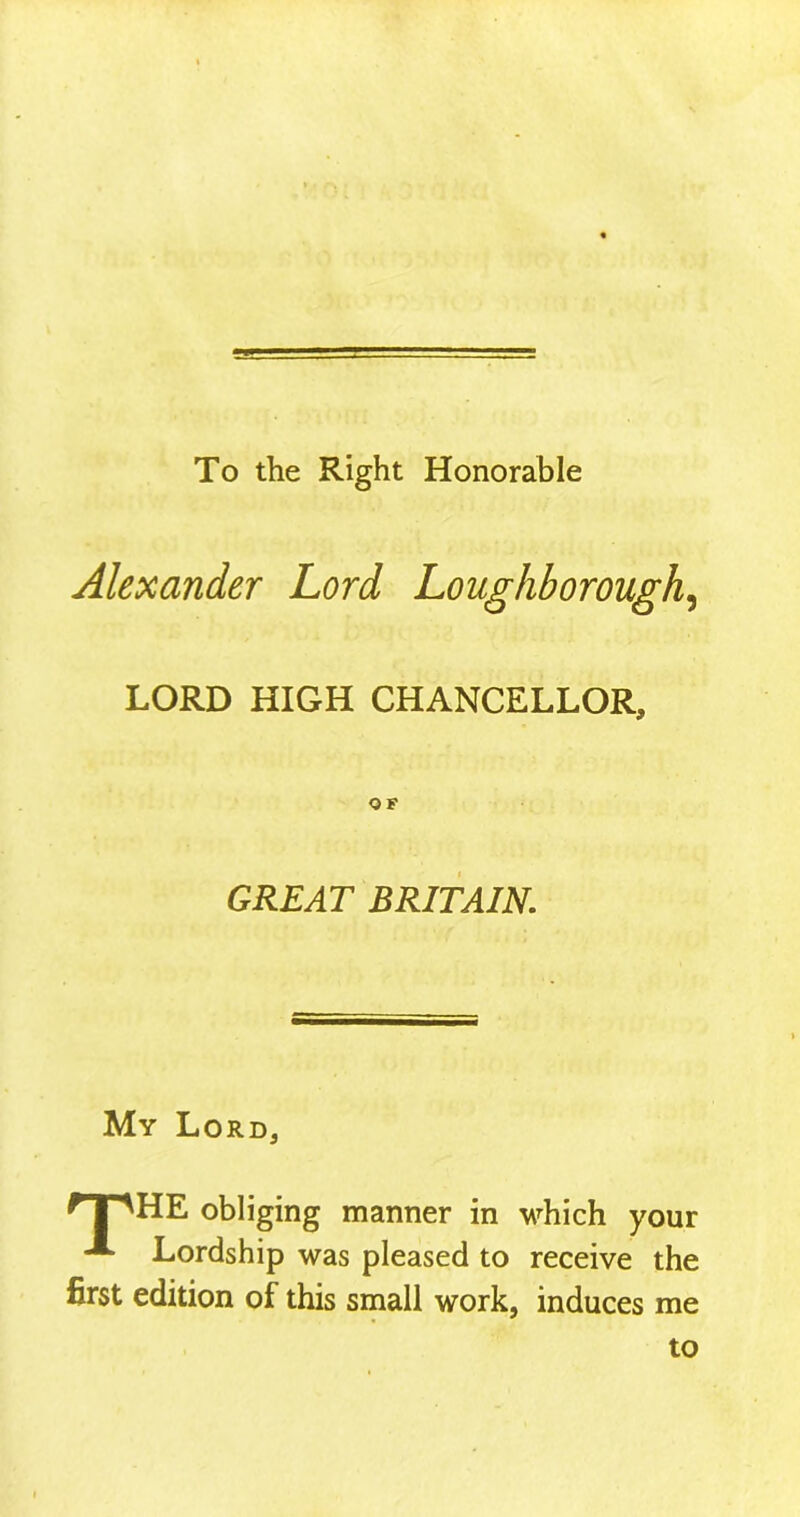 To the Right Honorable Alexander Lord Loughborough, LORD HIGH CHANCELLOR, GREAT BRITAIN. My Lord, f 1 'HE obliging manner in which your **■ Lordship was pleased to receive the first edition of this small work, induces me to